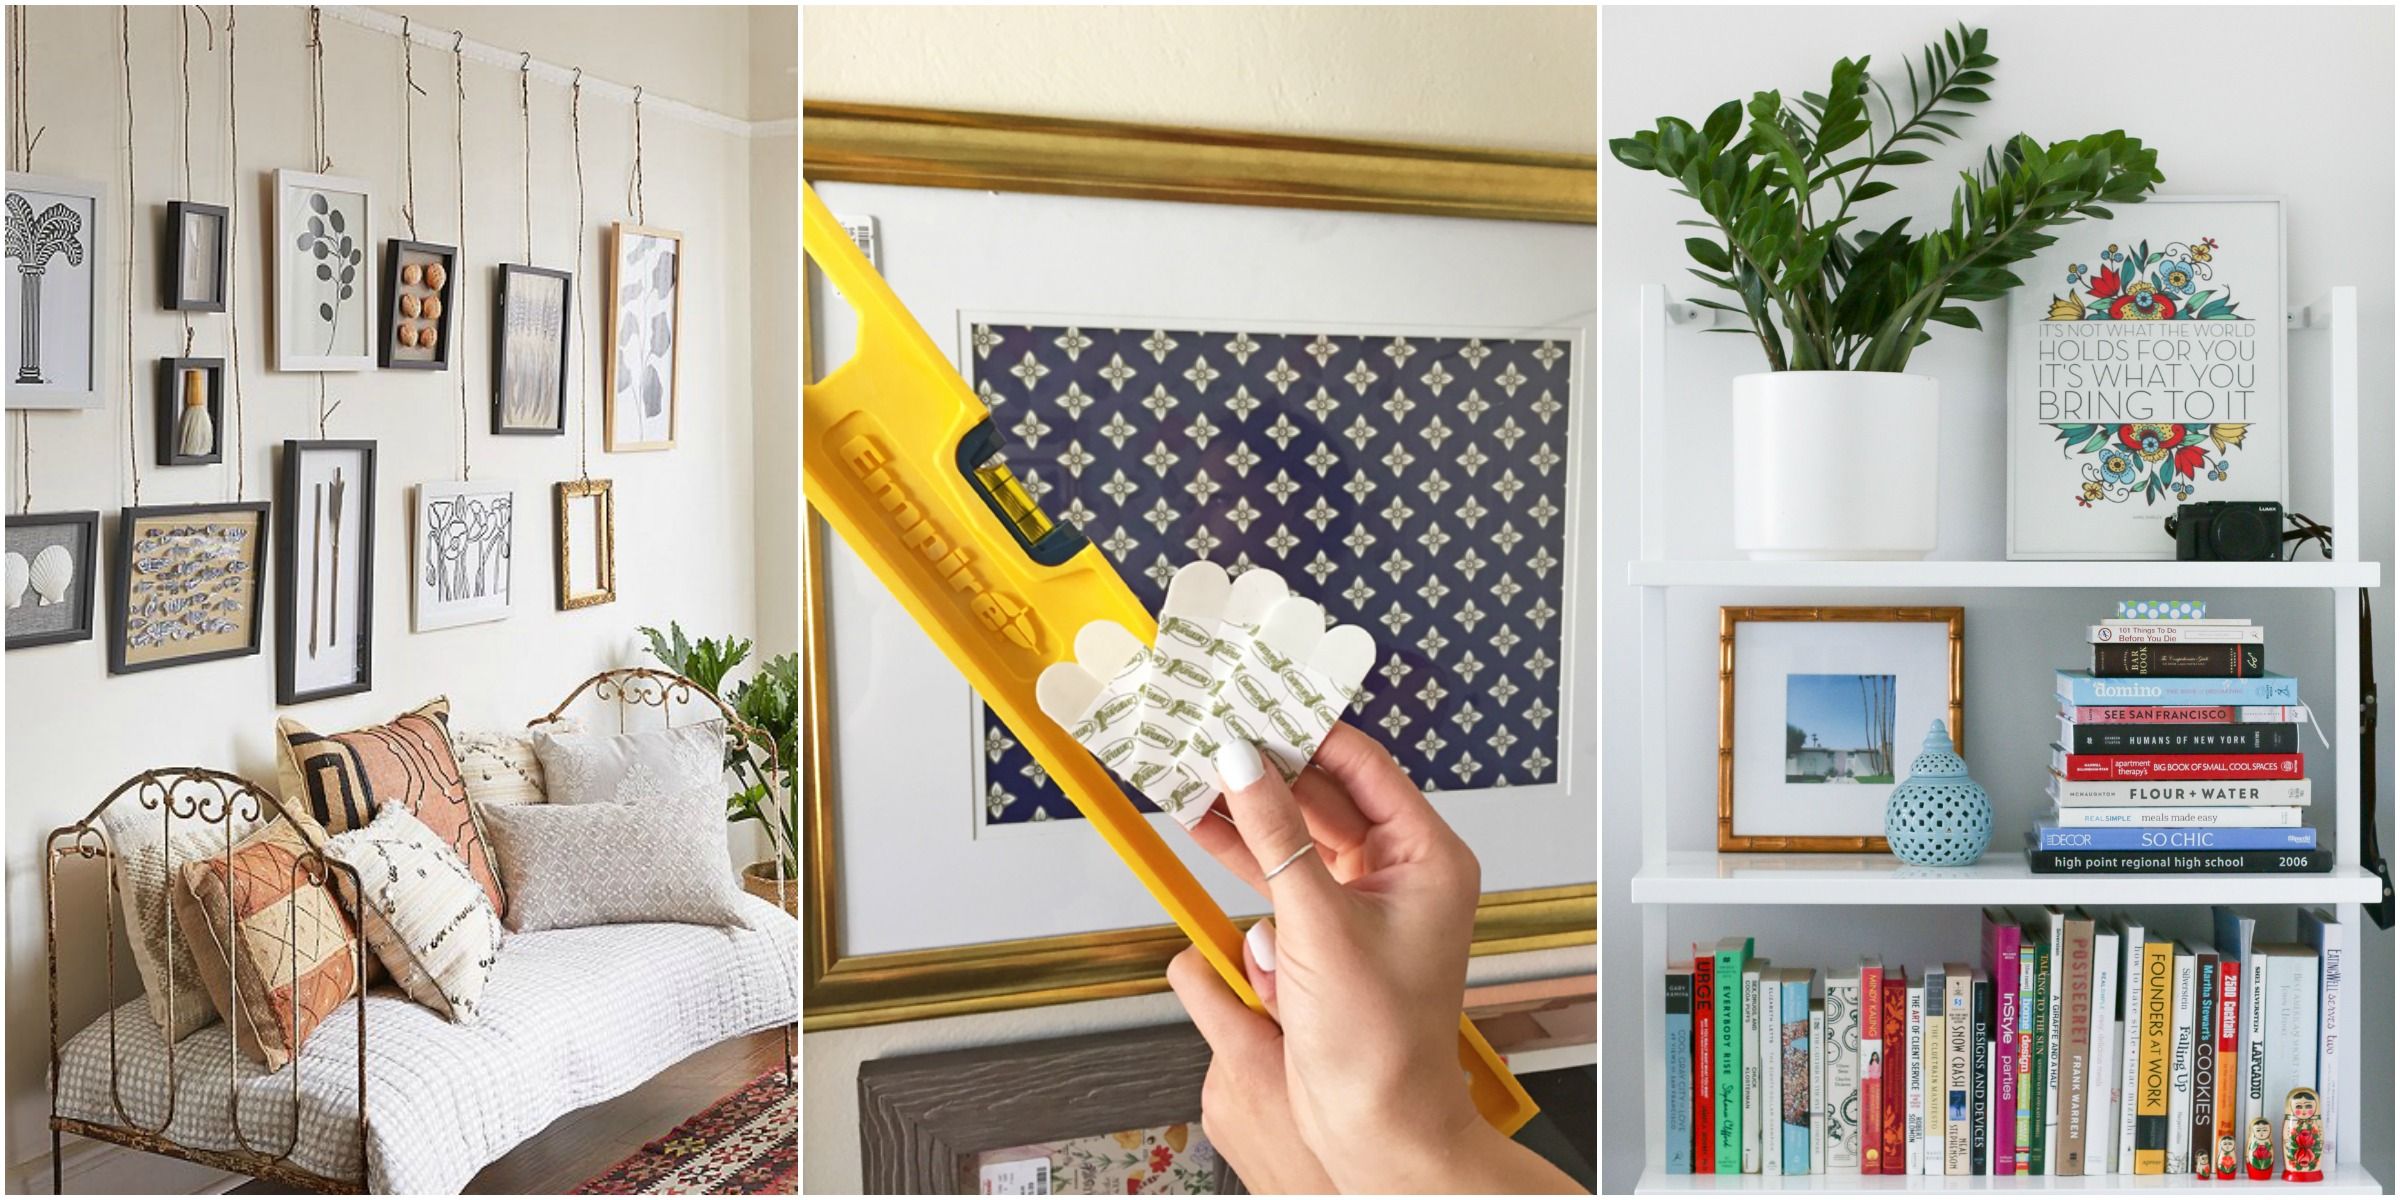 Hang Art Without Nails How To, How To Secure A Bookcase The Wall Without Drilling